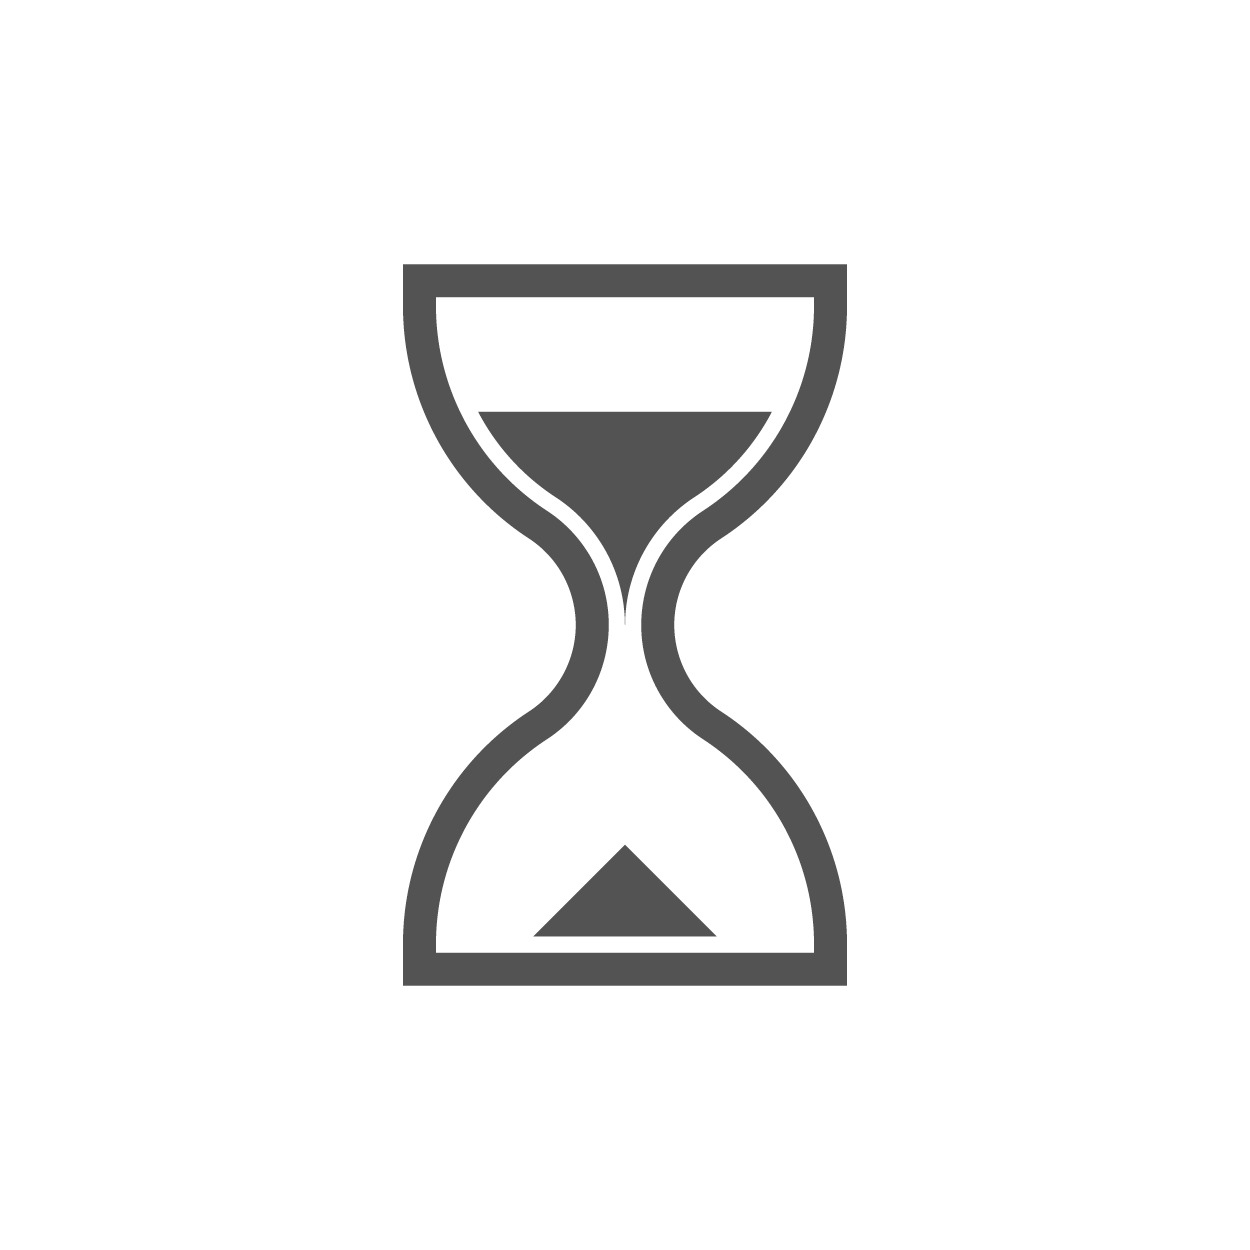 Time by Pham Duy Phuong Hung from the Noun Project